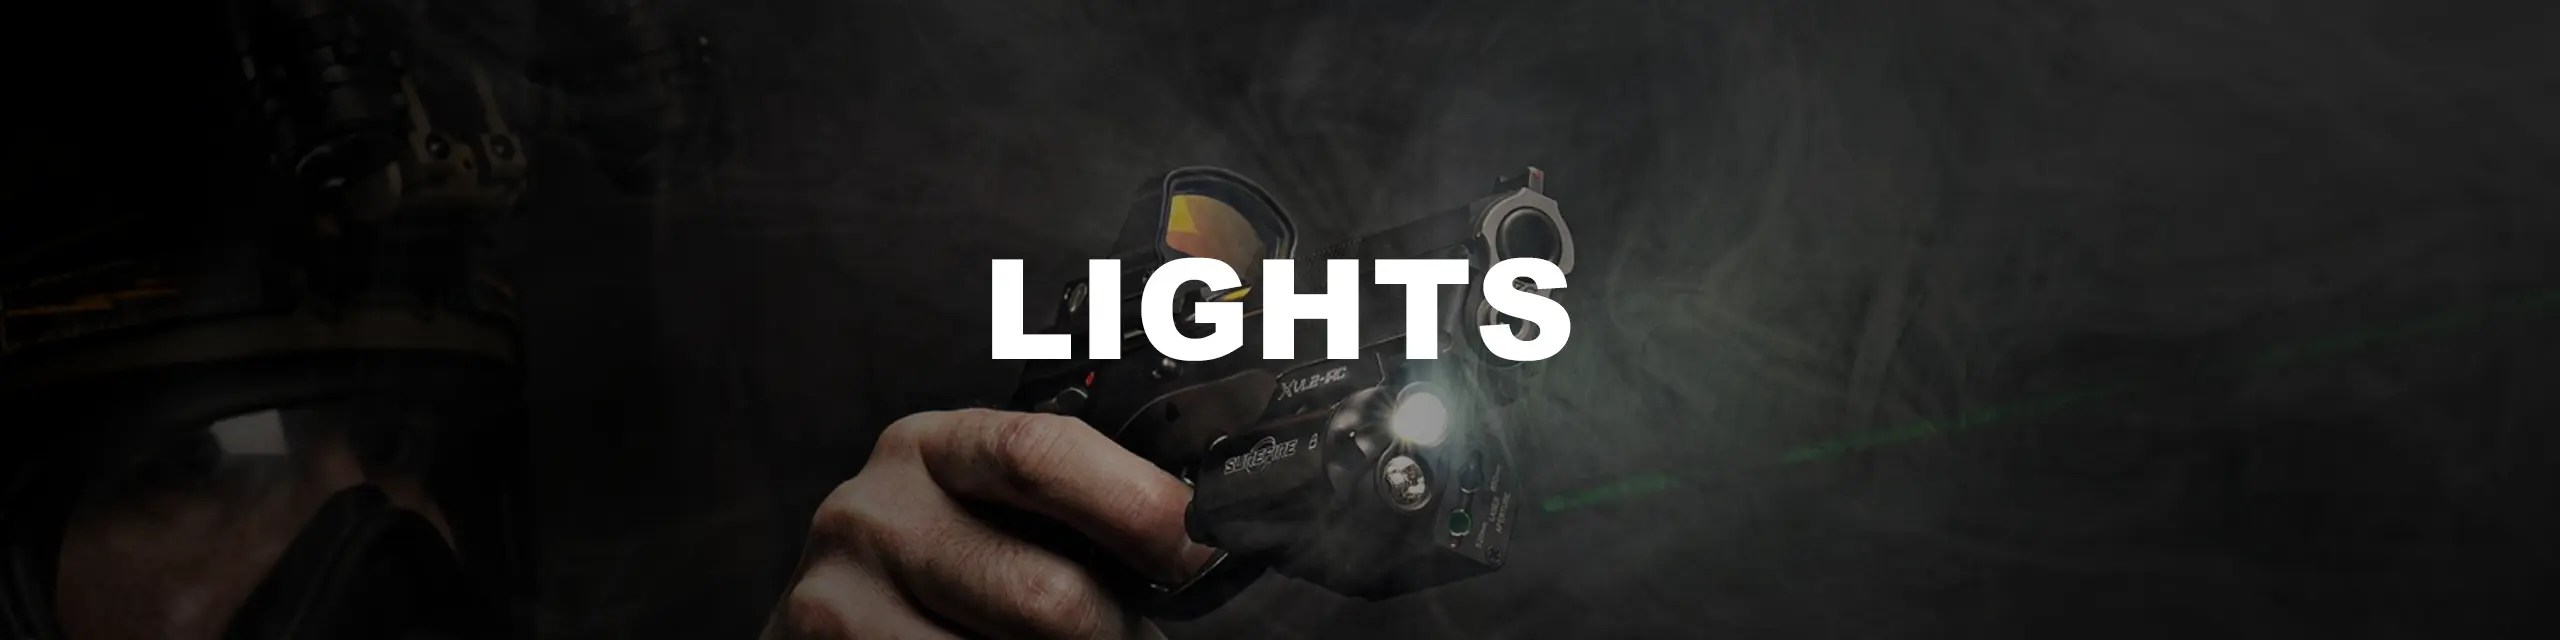 Lights offered by East Texas gunner